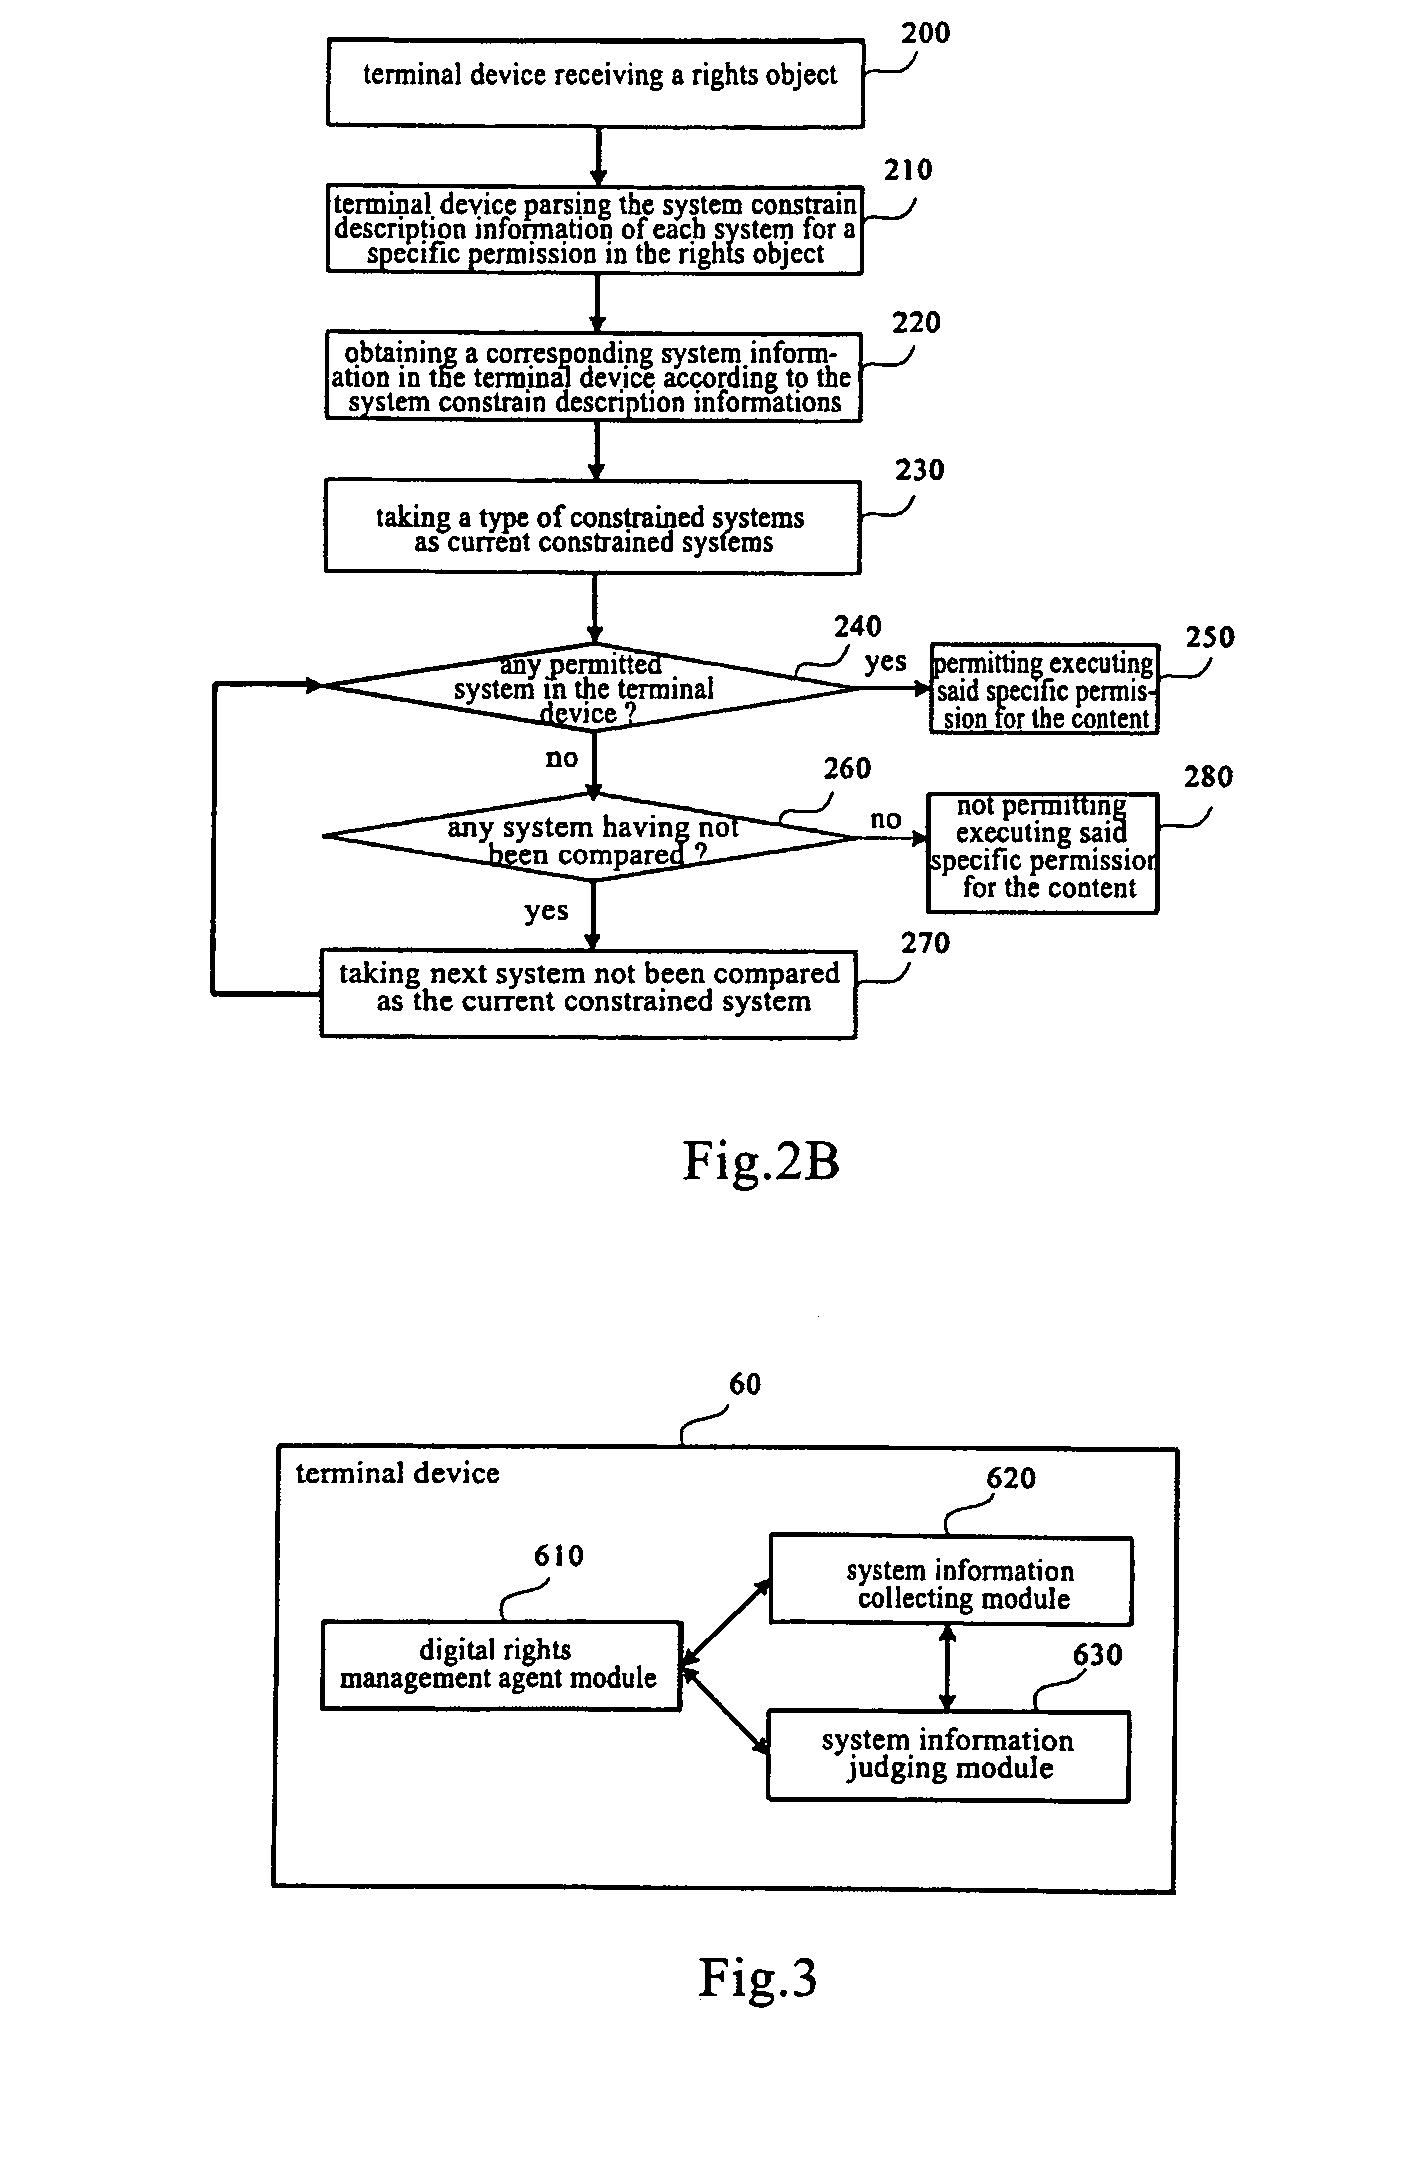 Method and apparatus for making system constraint of a specified permission in the digital rights management